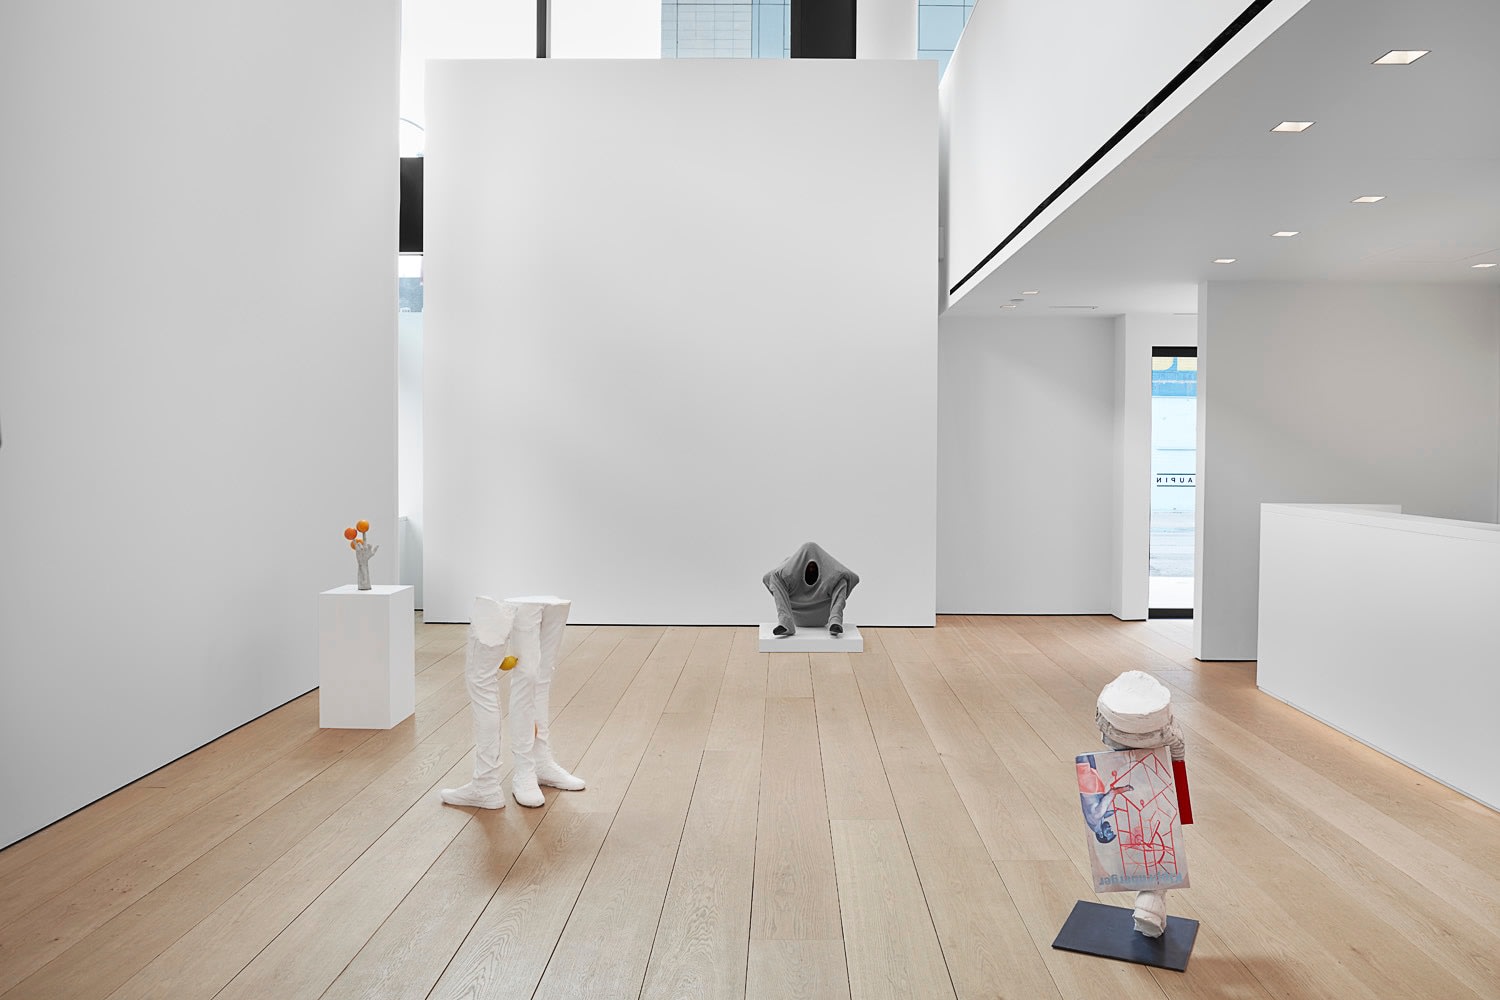 Installation view of Erwin Wurm's exhibition Yes Biological at Lehmann Maupin, New York, 2020, View 6